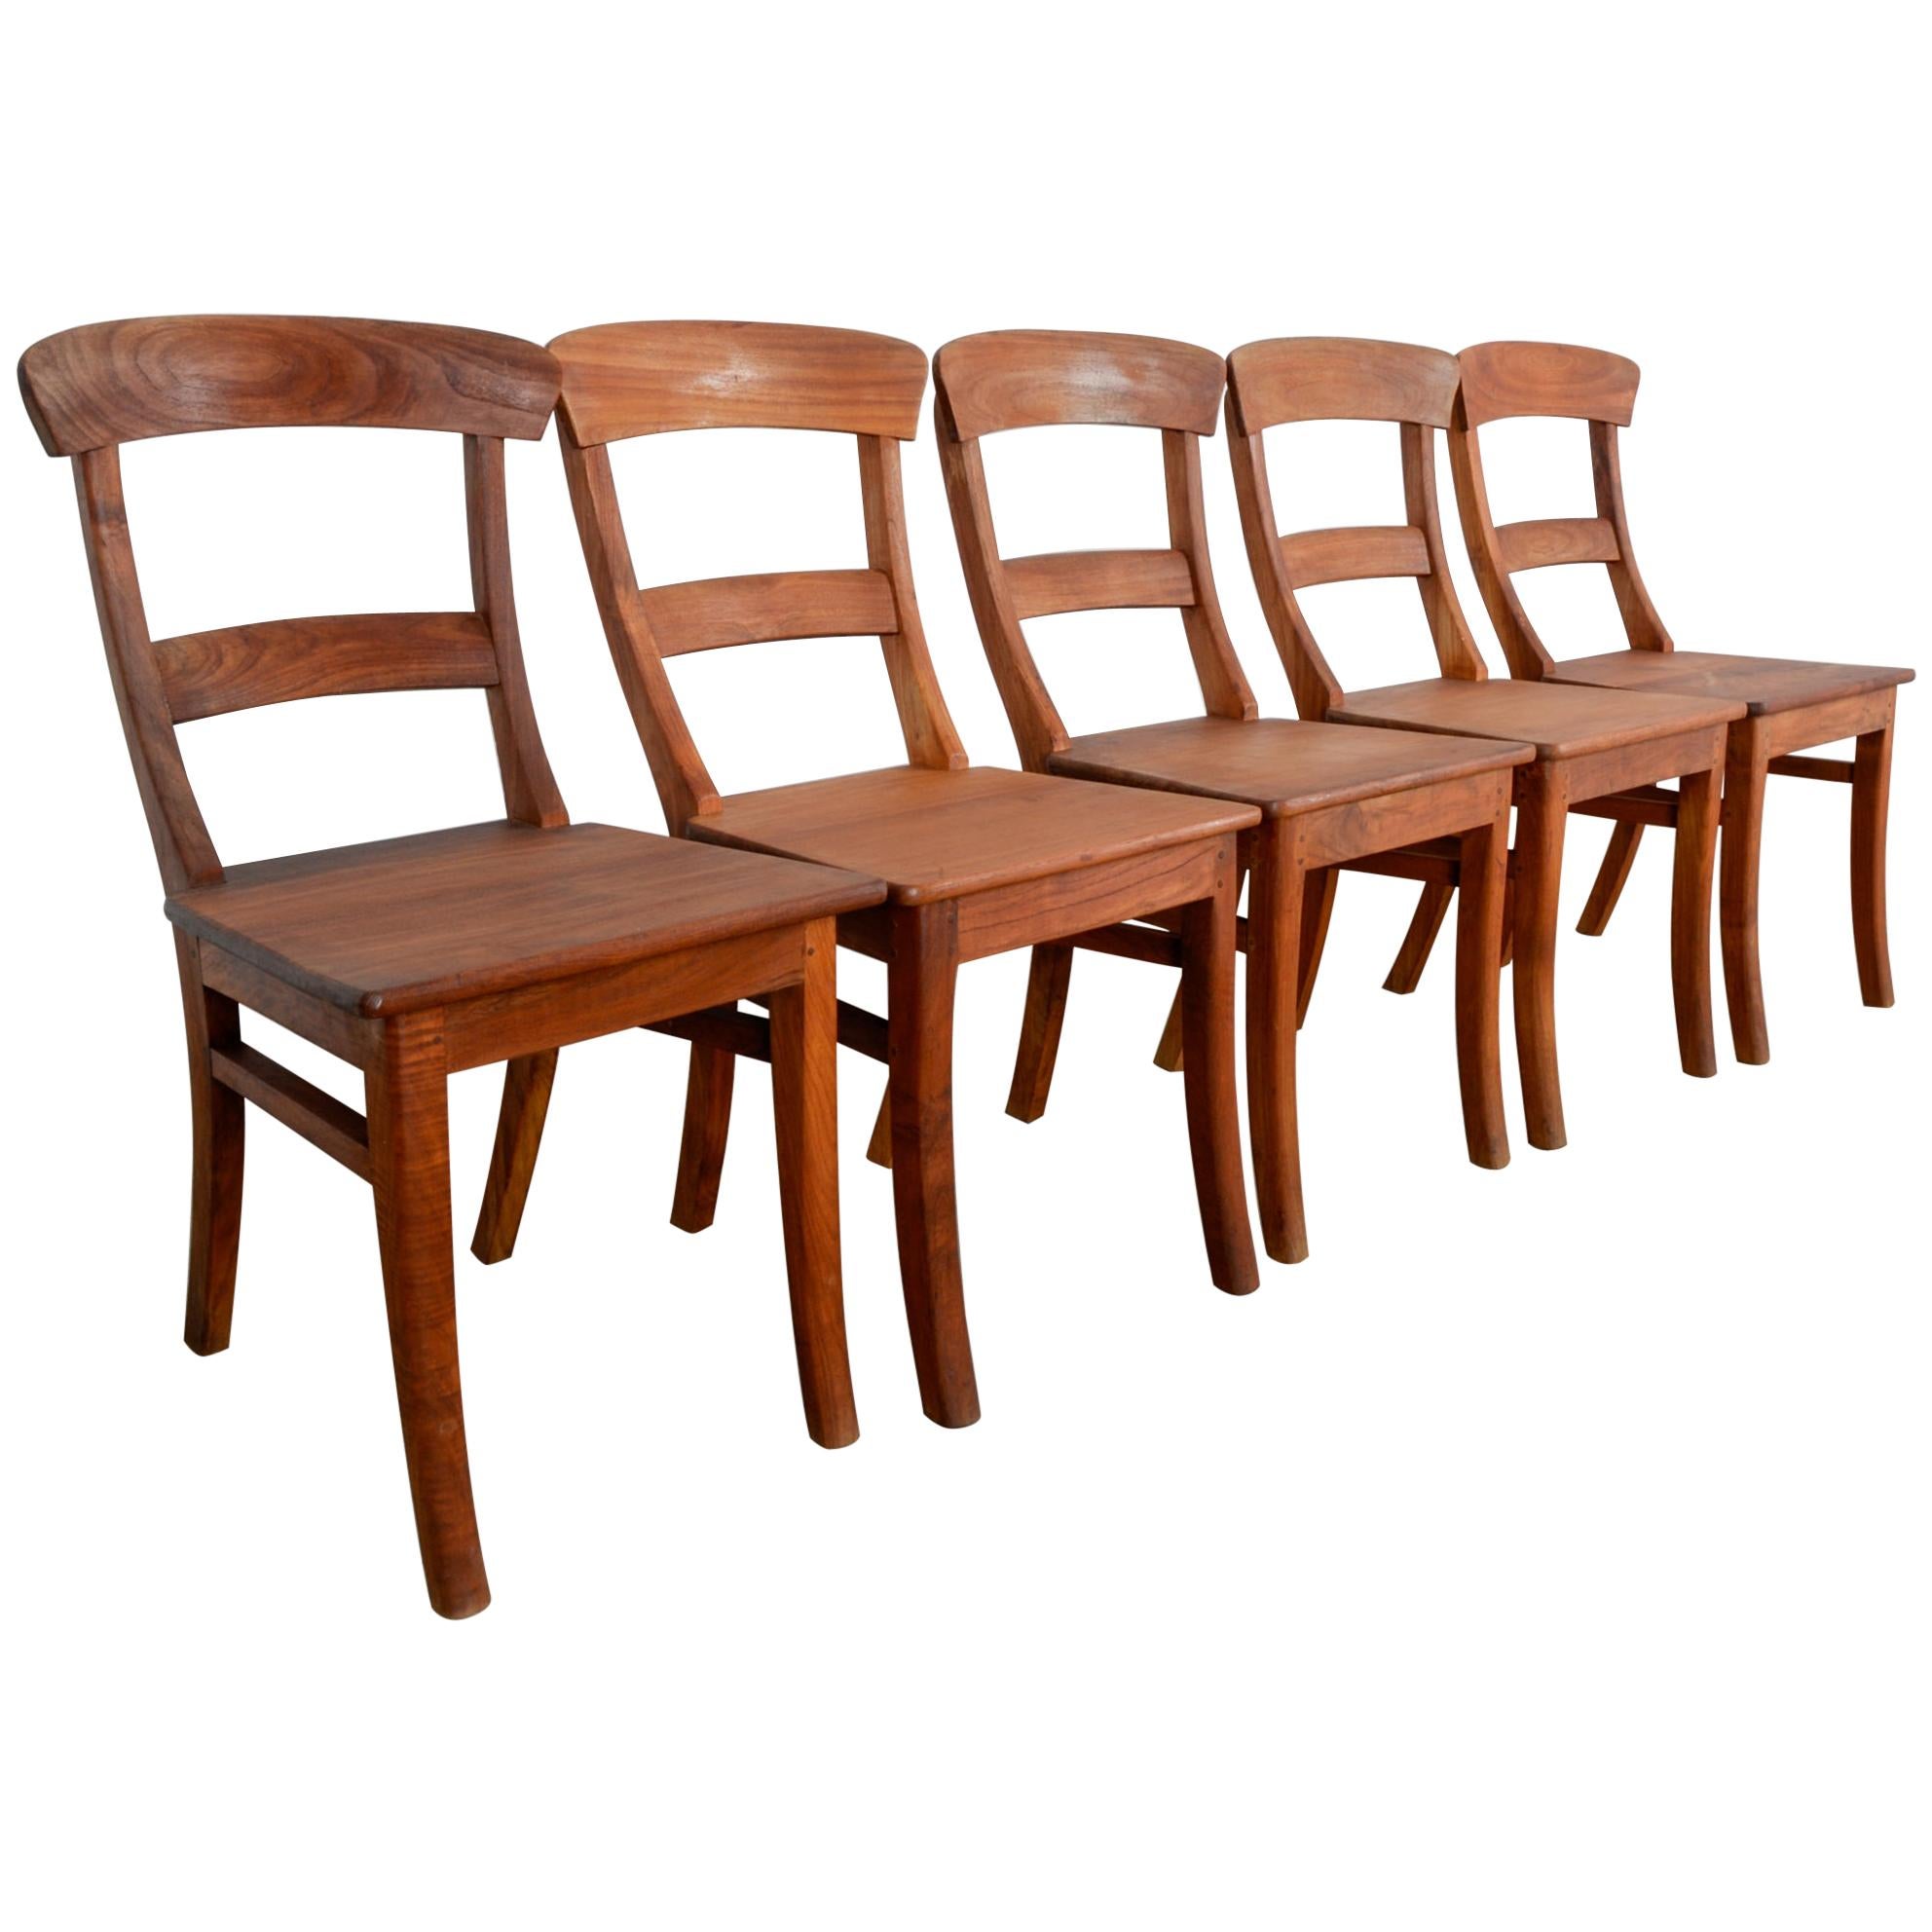 Rustic European Dining Chairs, Set of Five